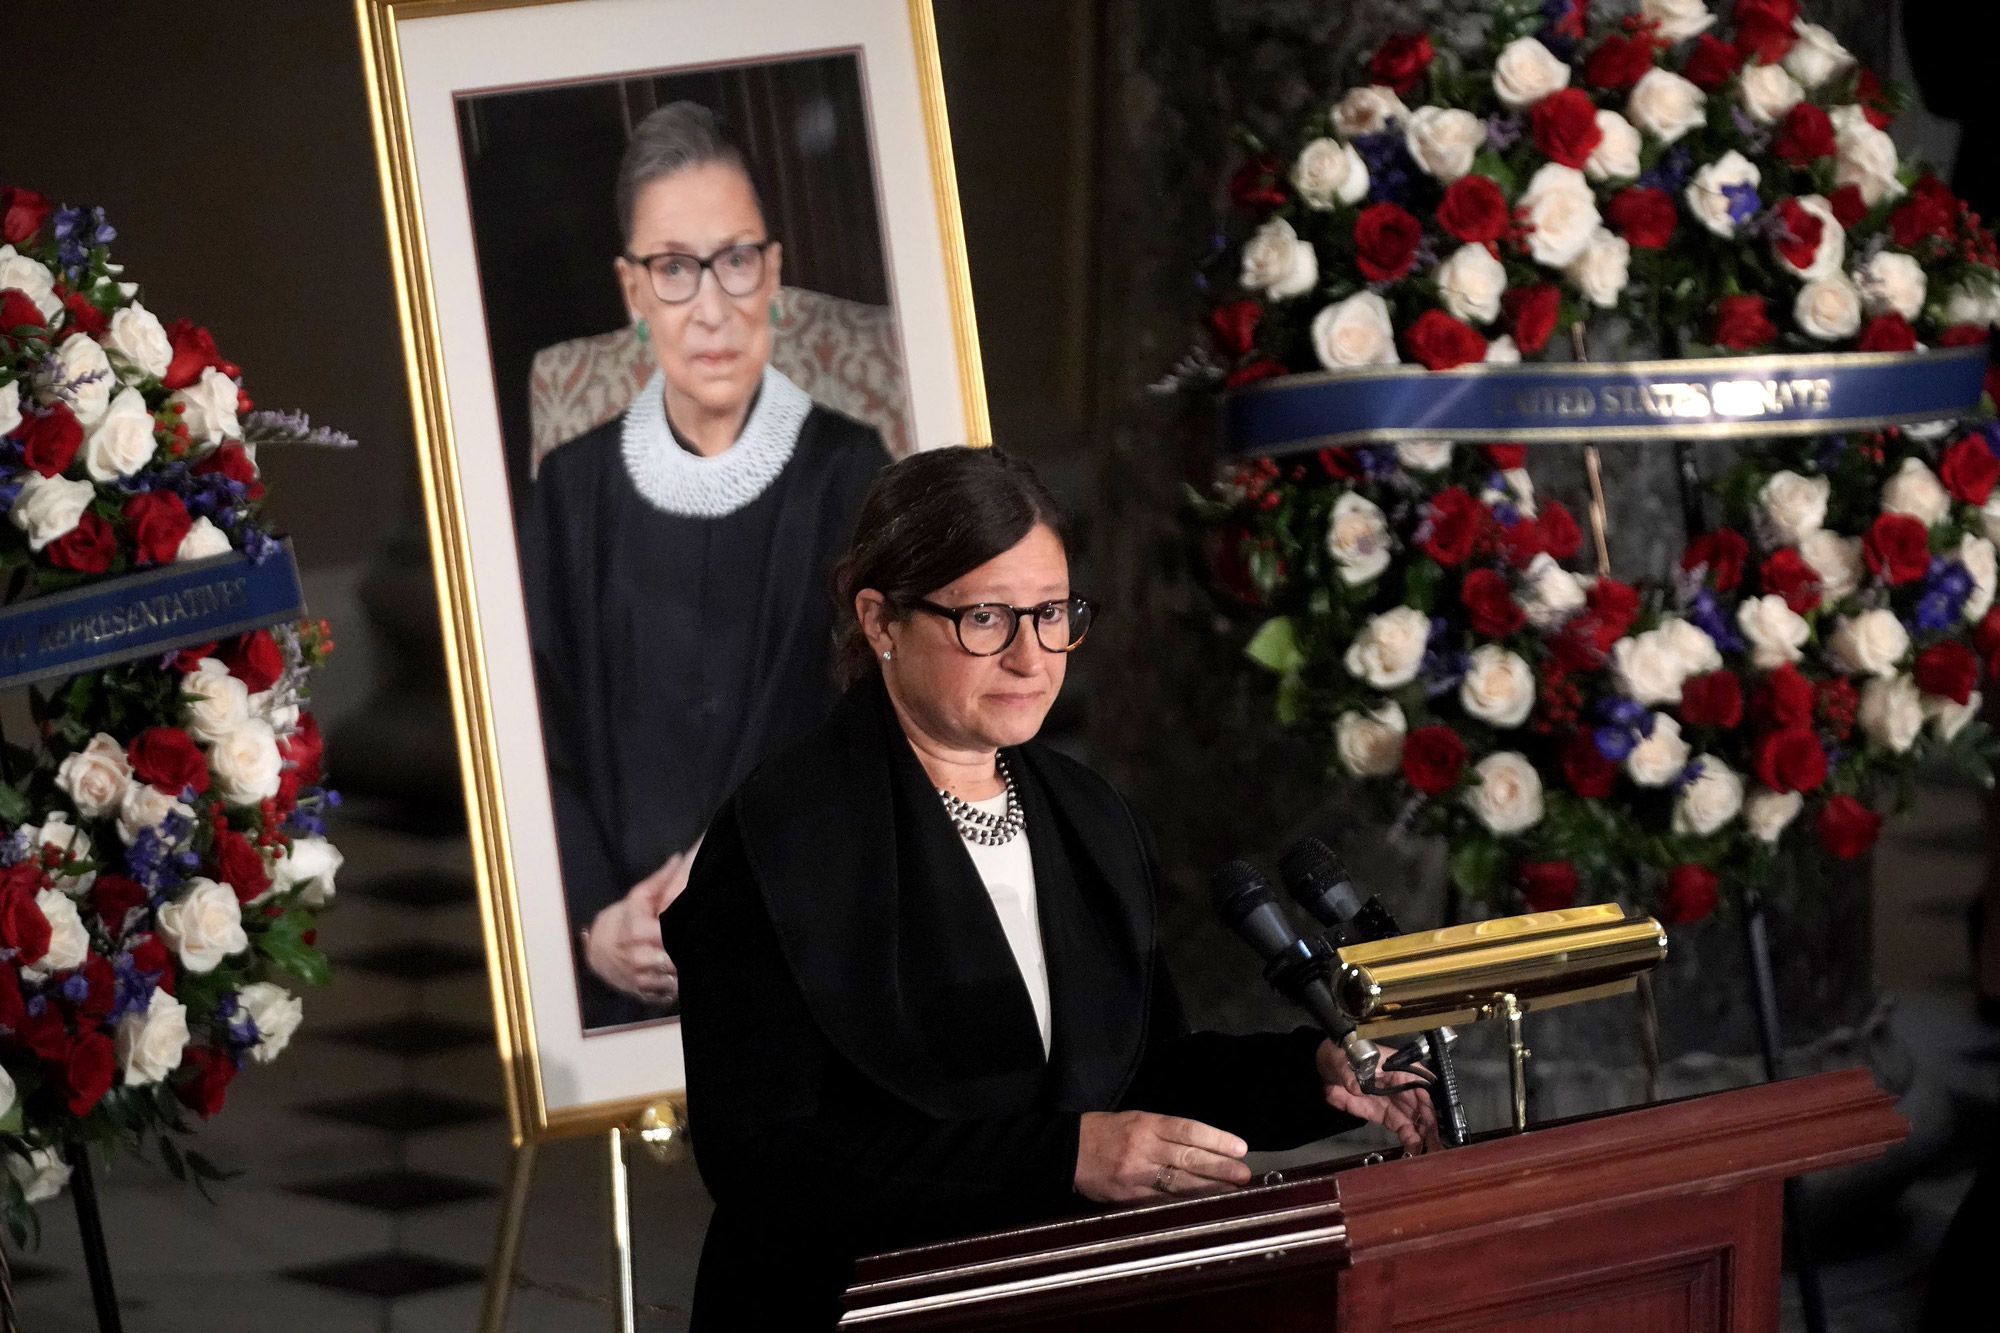 Rabbi Lauren Holtzblatt speaks during a ceremony to honor the late Justice Ruth Bader Ginsburg as she lies in state at Statuary Hall in the US Capitol in Washington, DC, on September 25.